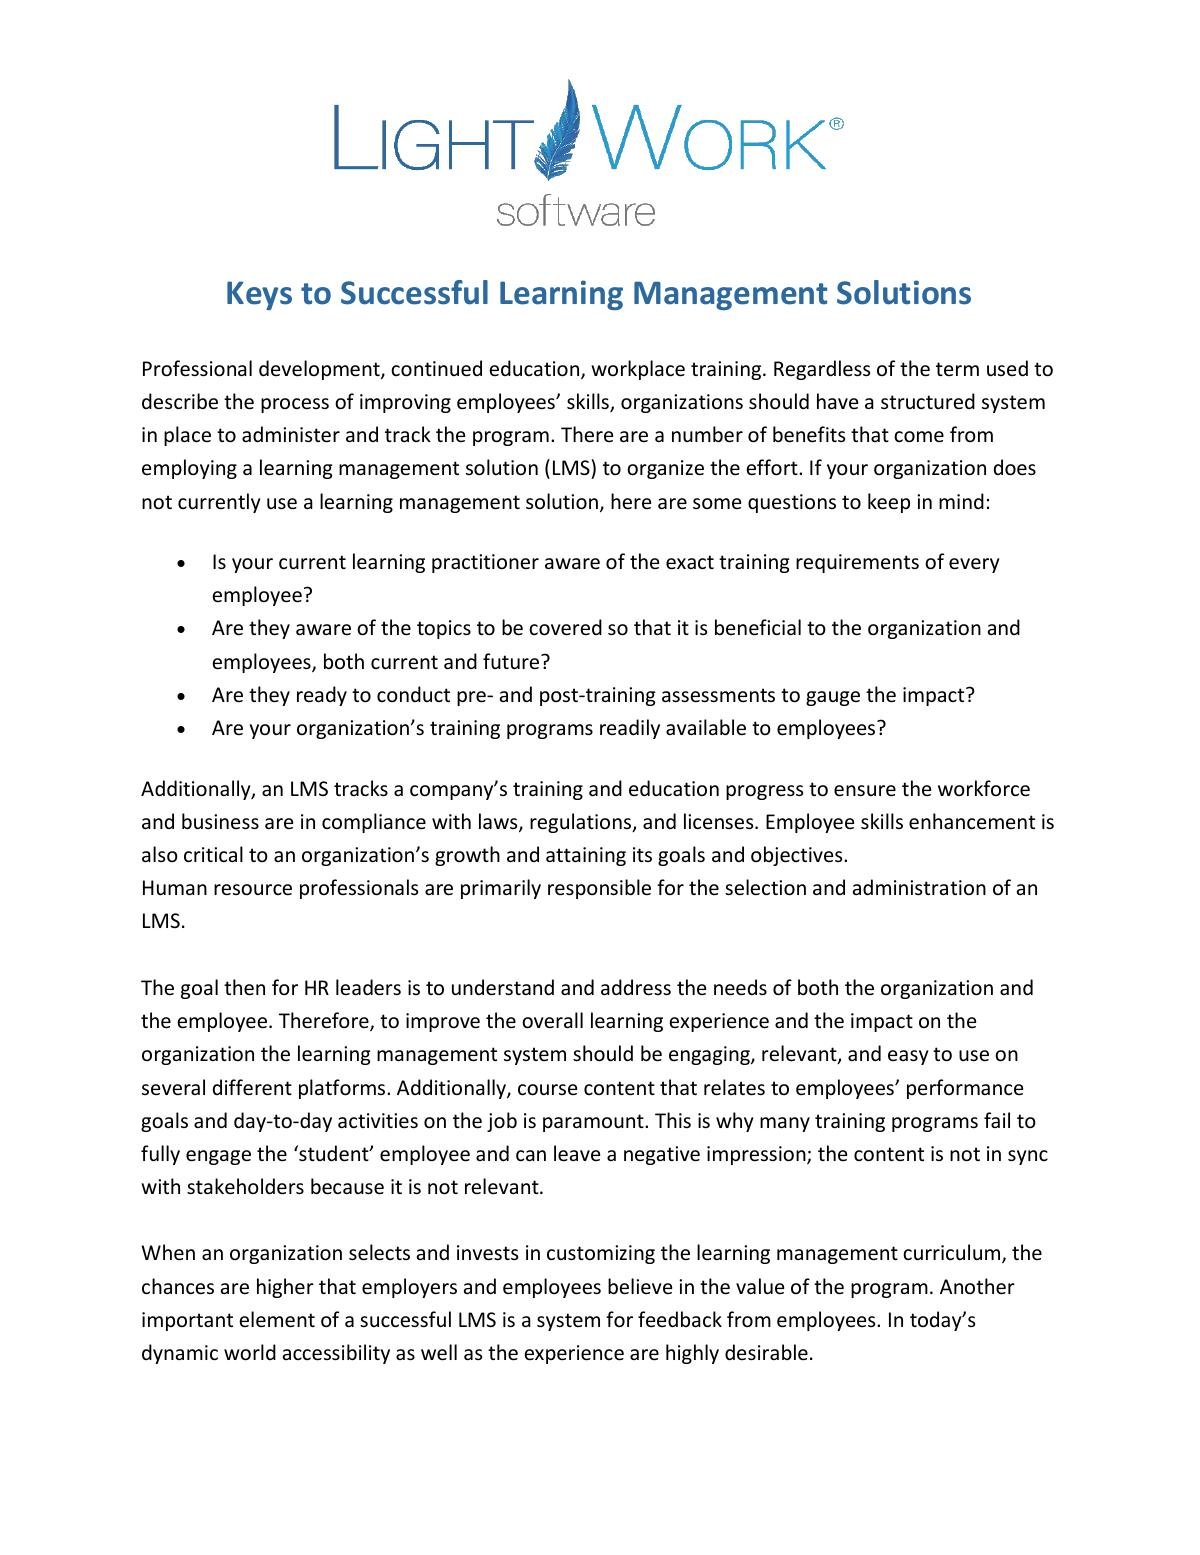 Keys to Successful Learning Management Solutions